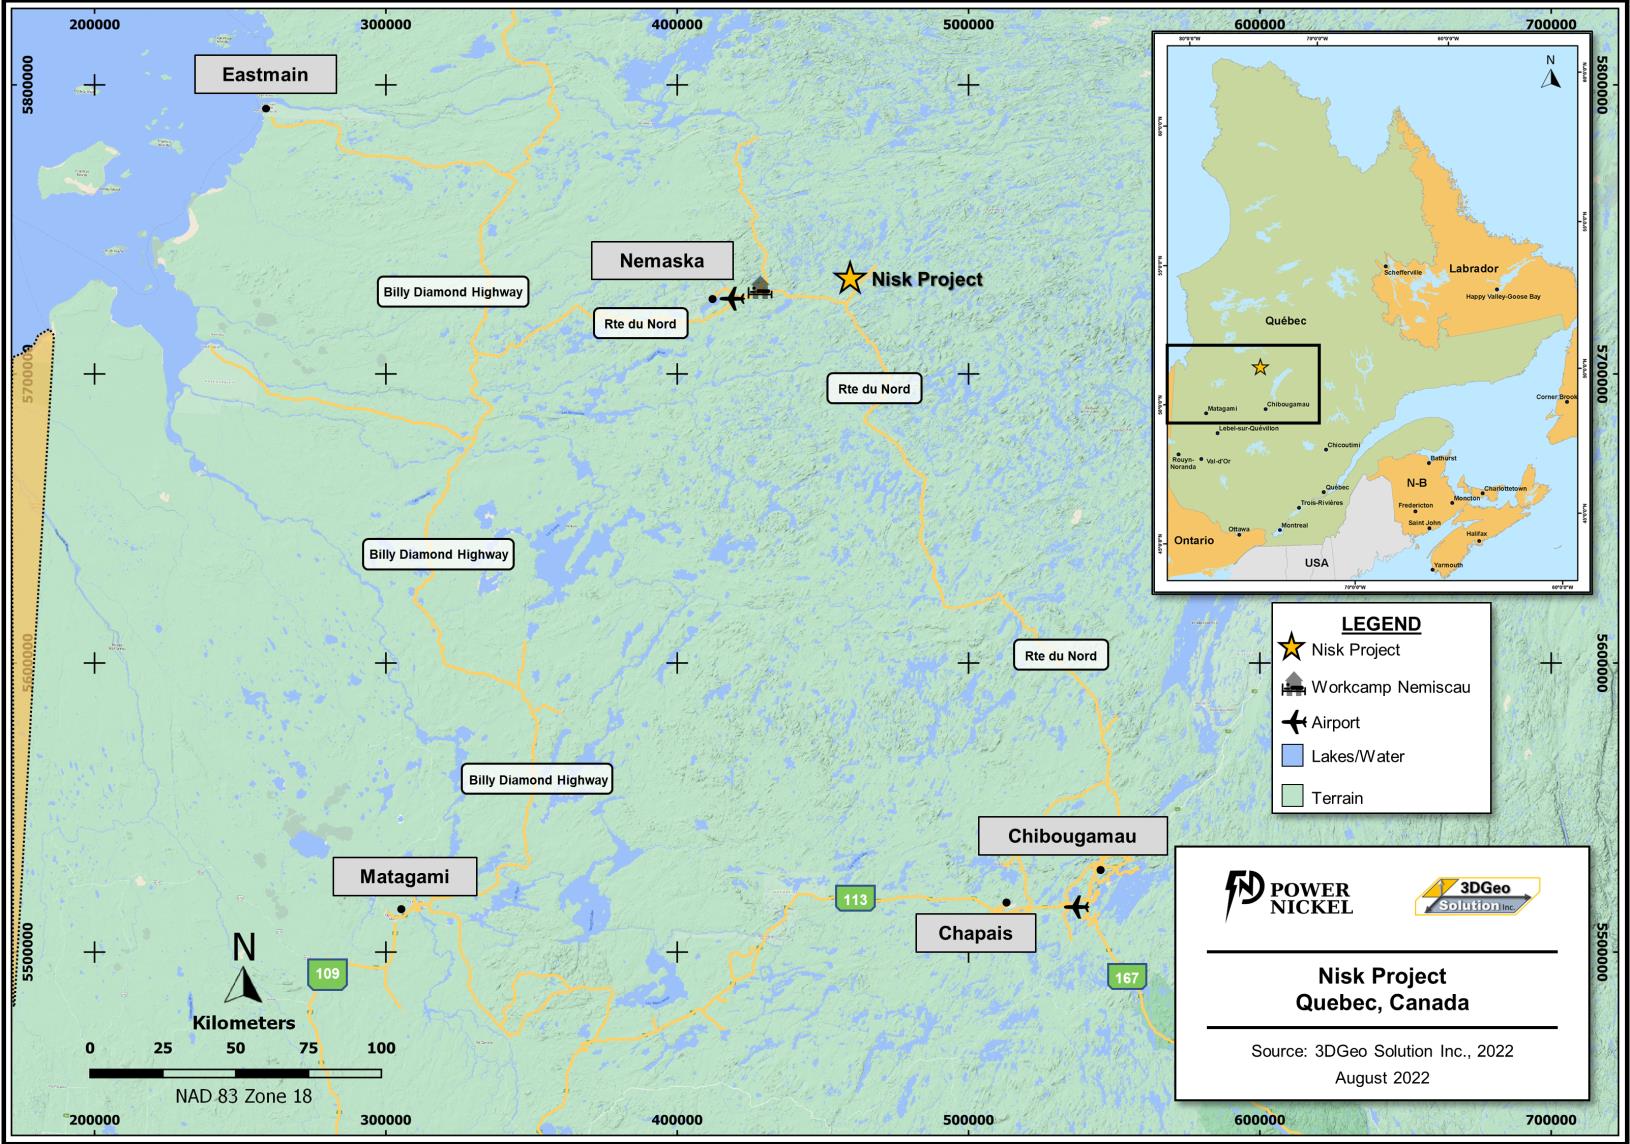 Figure 2 - Location of the Nisk Project in the Province of Québec